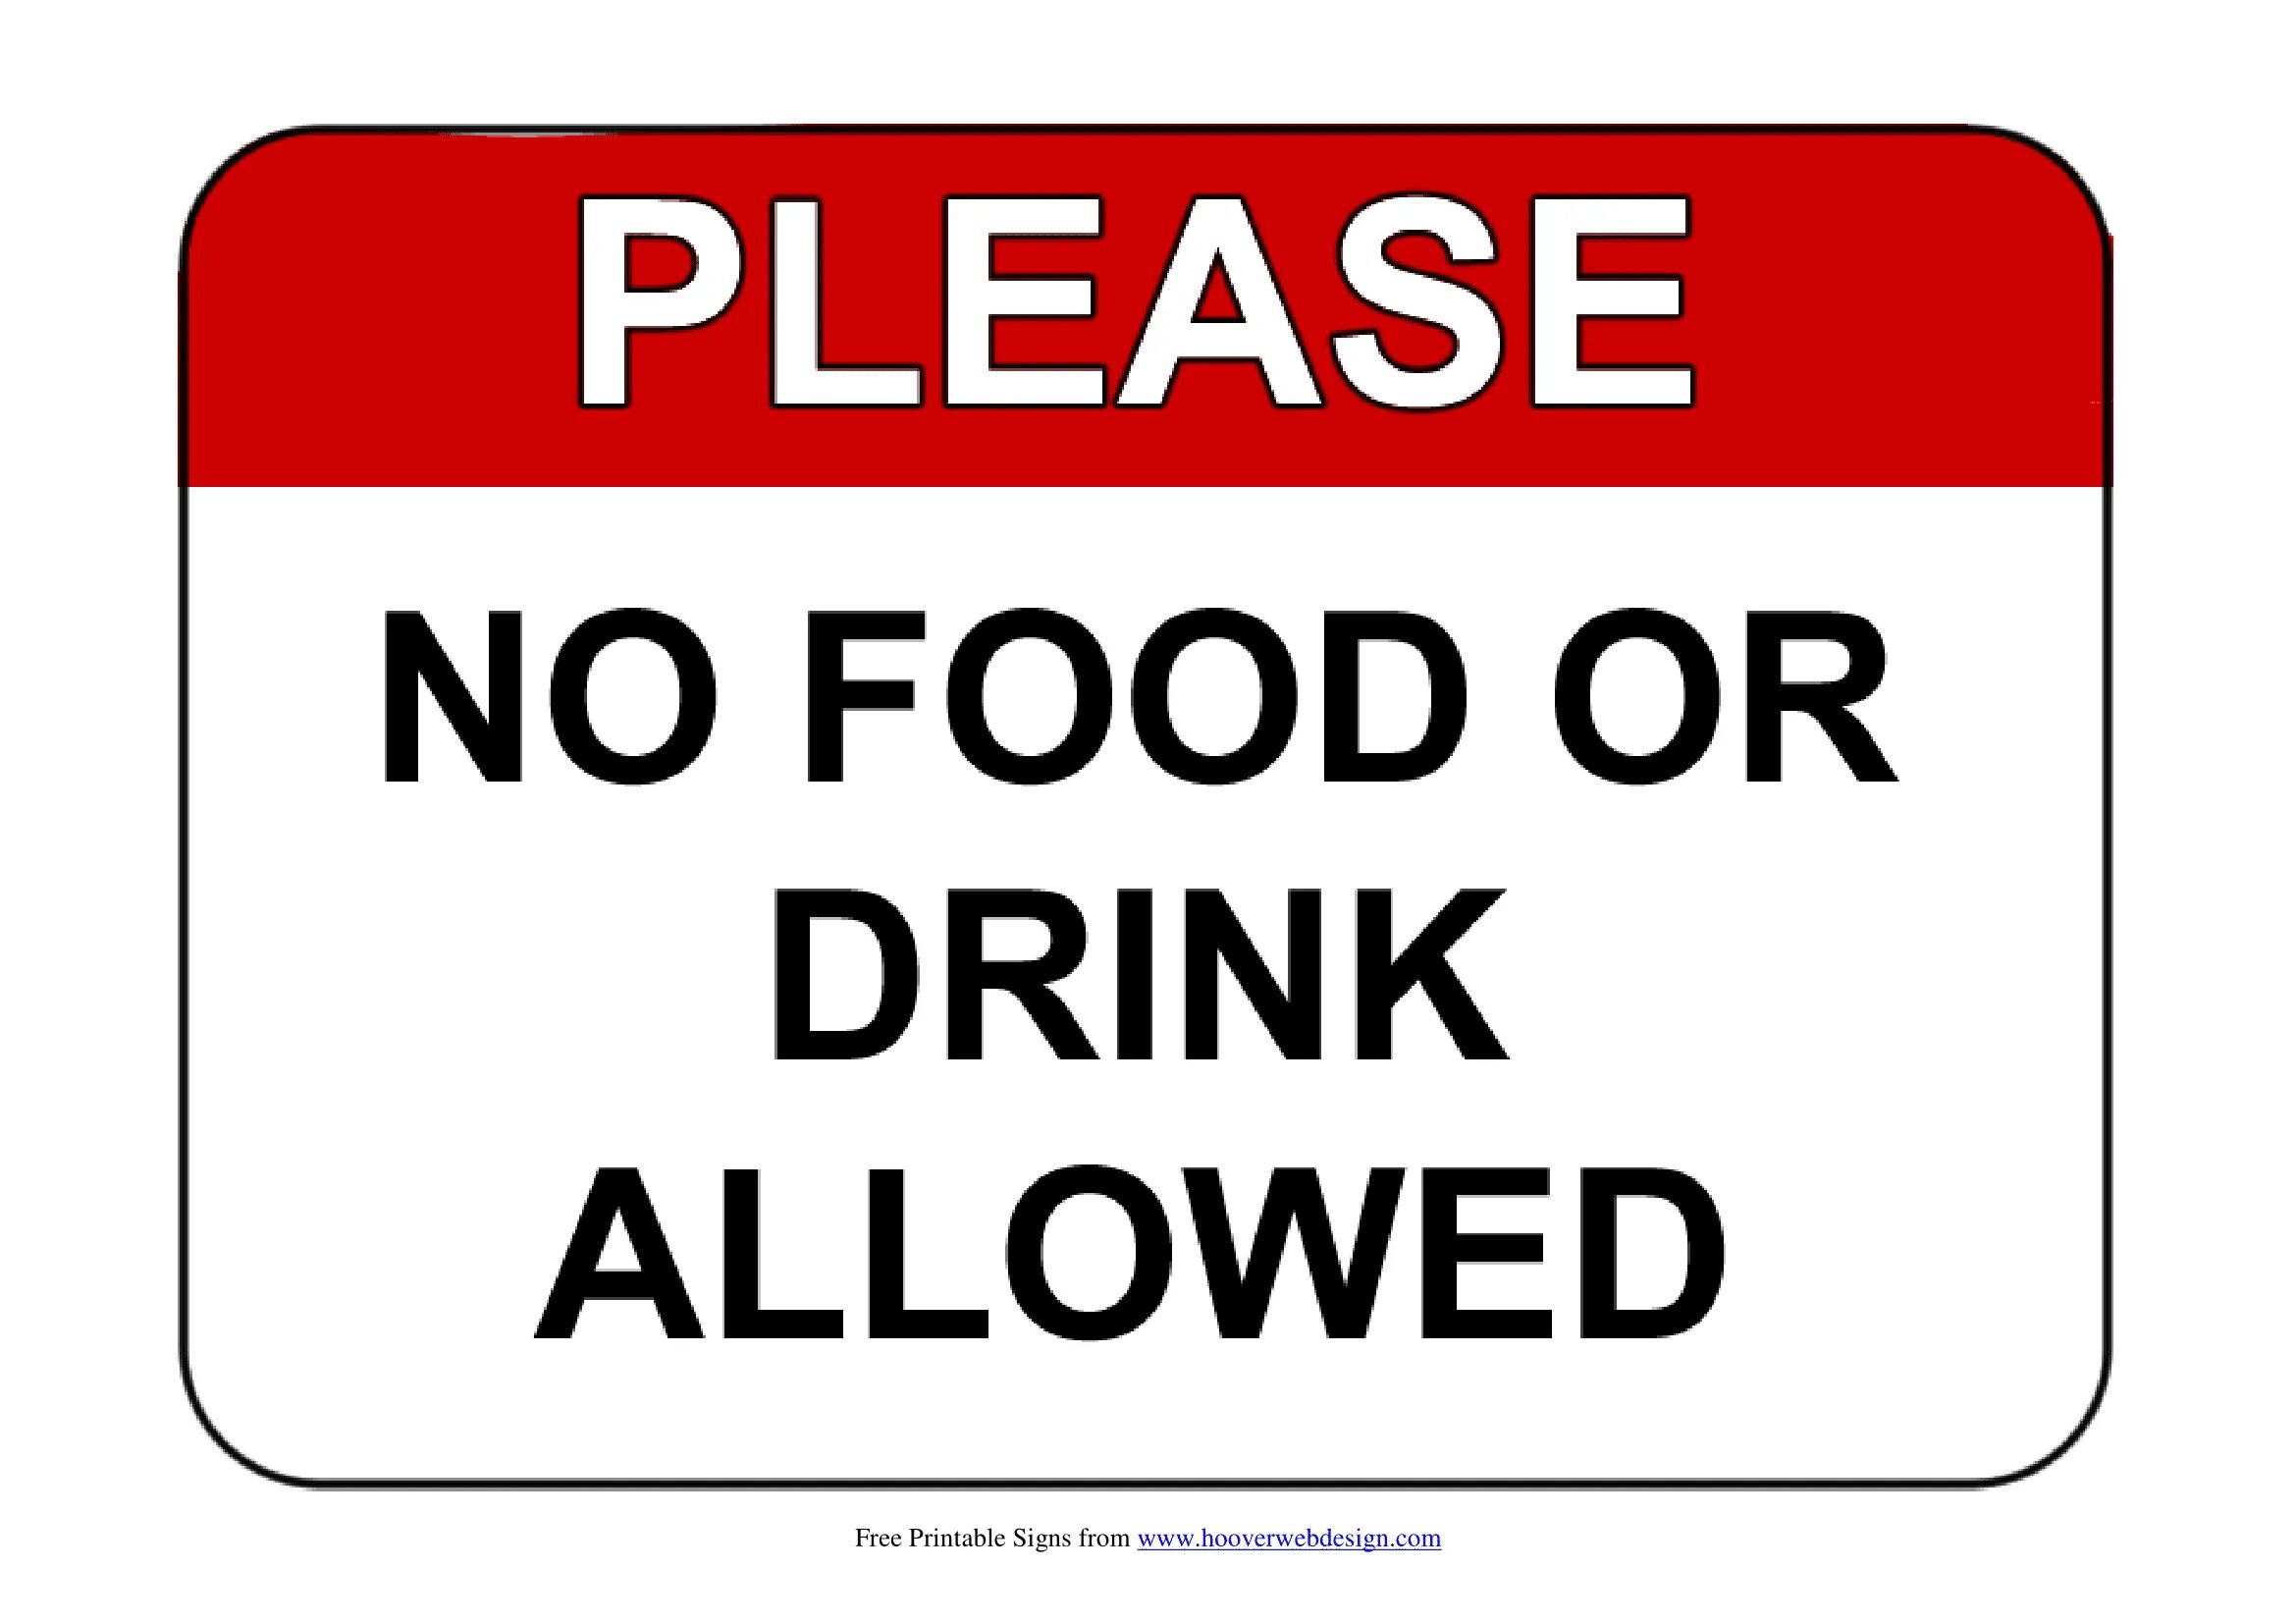 Allow images. No food or Drink. Food sign. Not allowed. No food or Drink in this area.